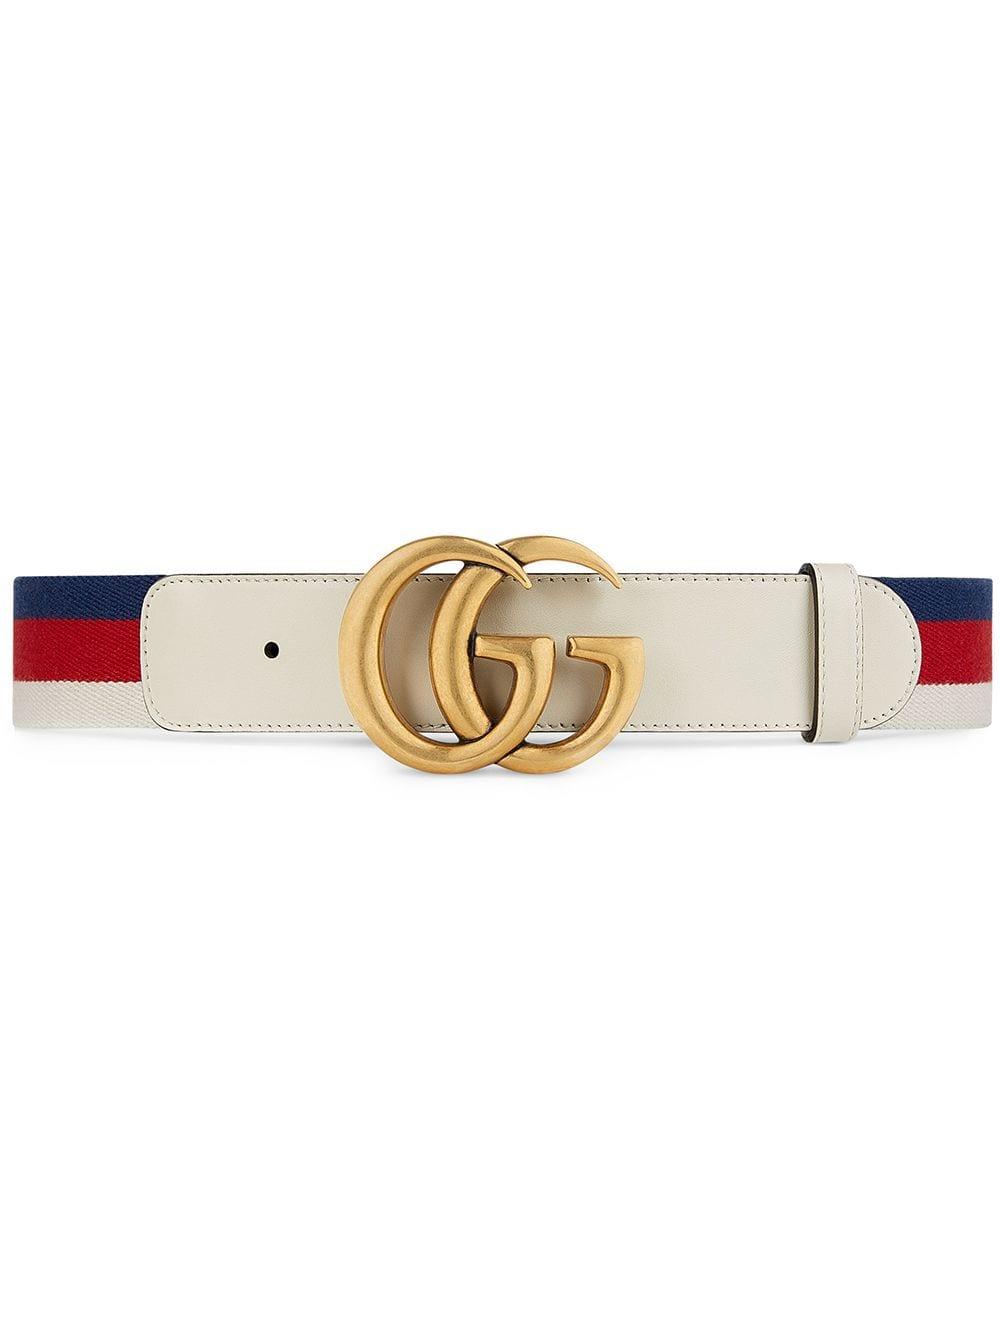 Gucci Leather Sylvie Web Belt With Double G Buckle in White | Lyst Canada